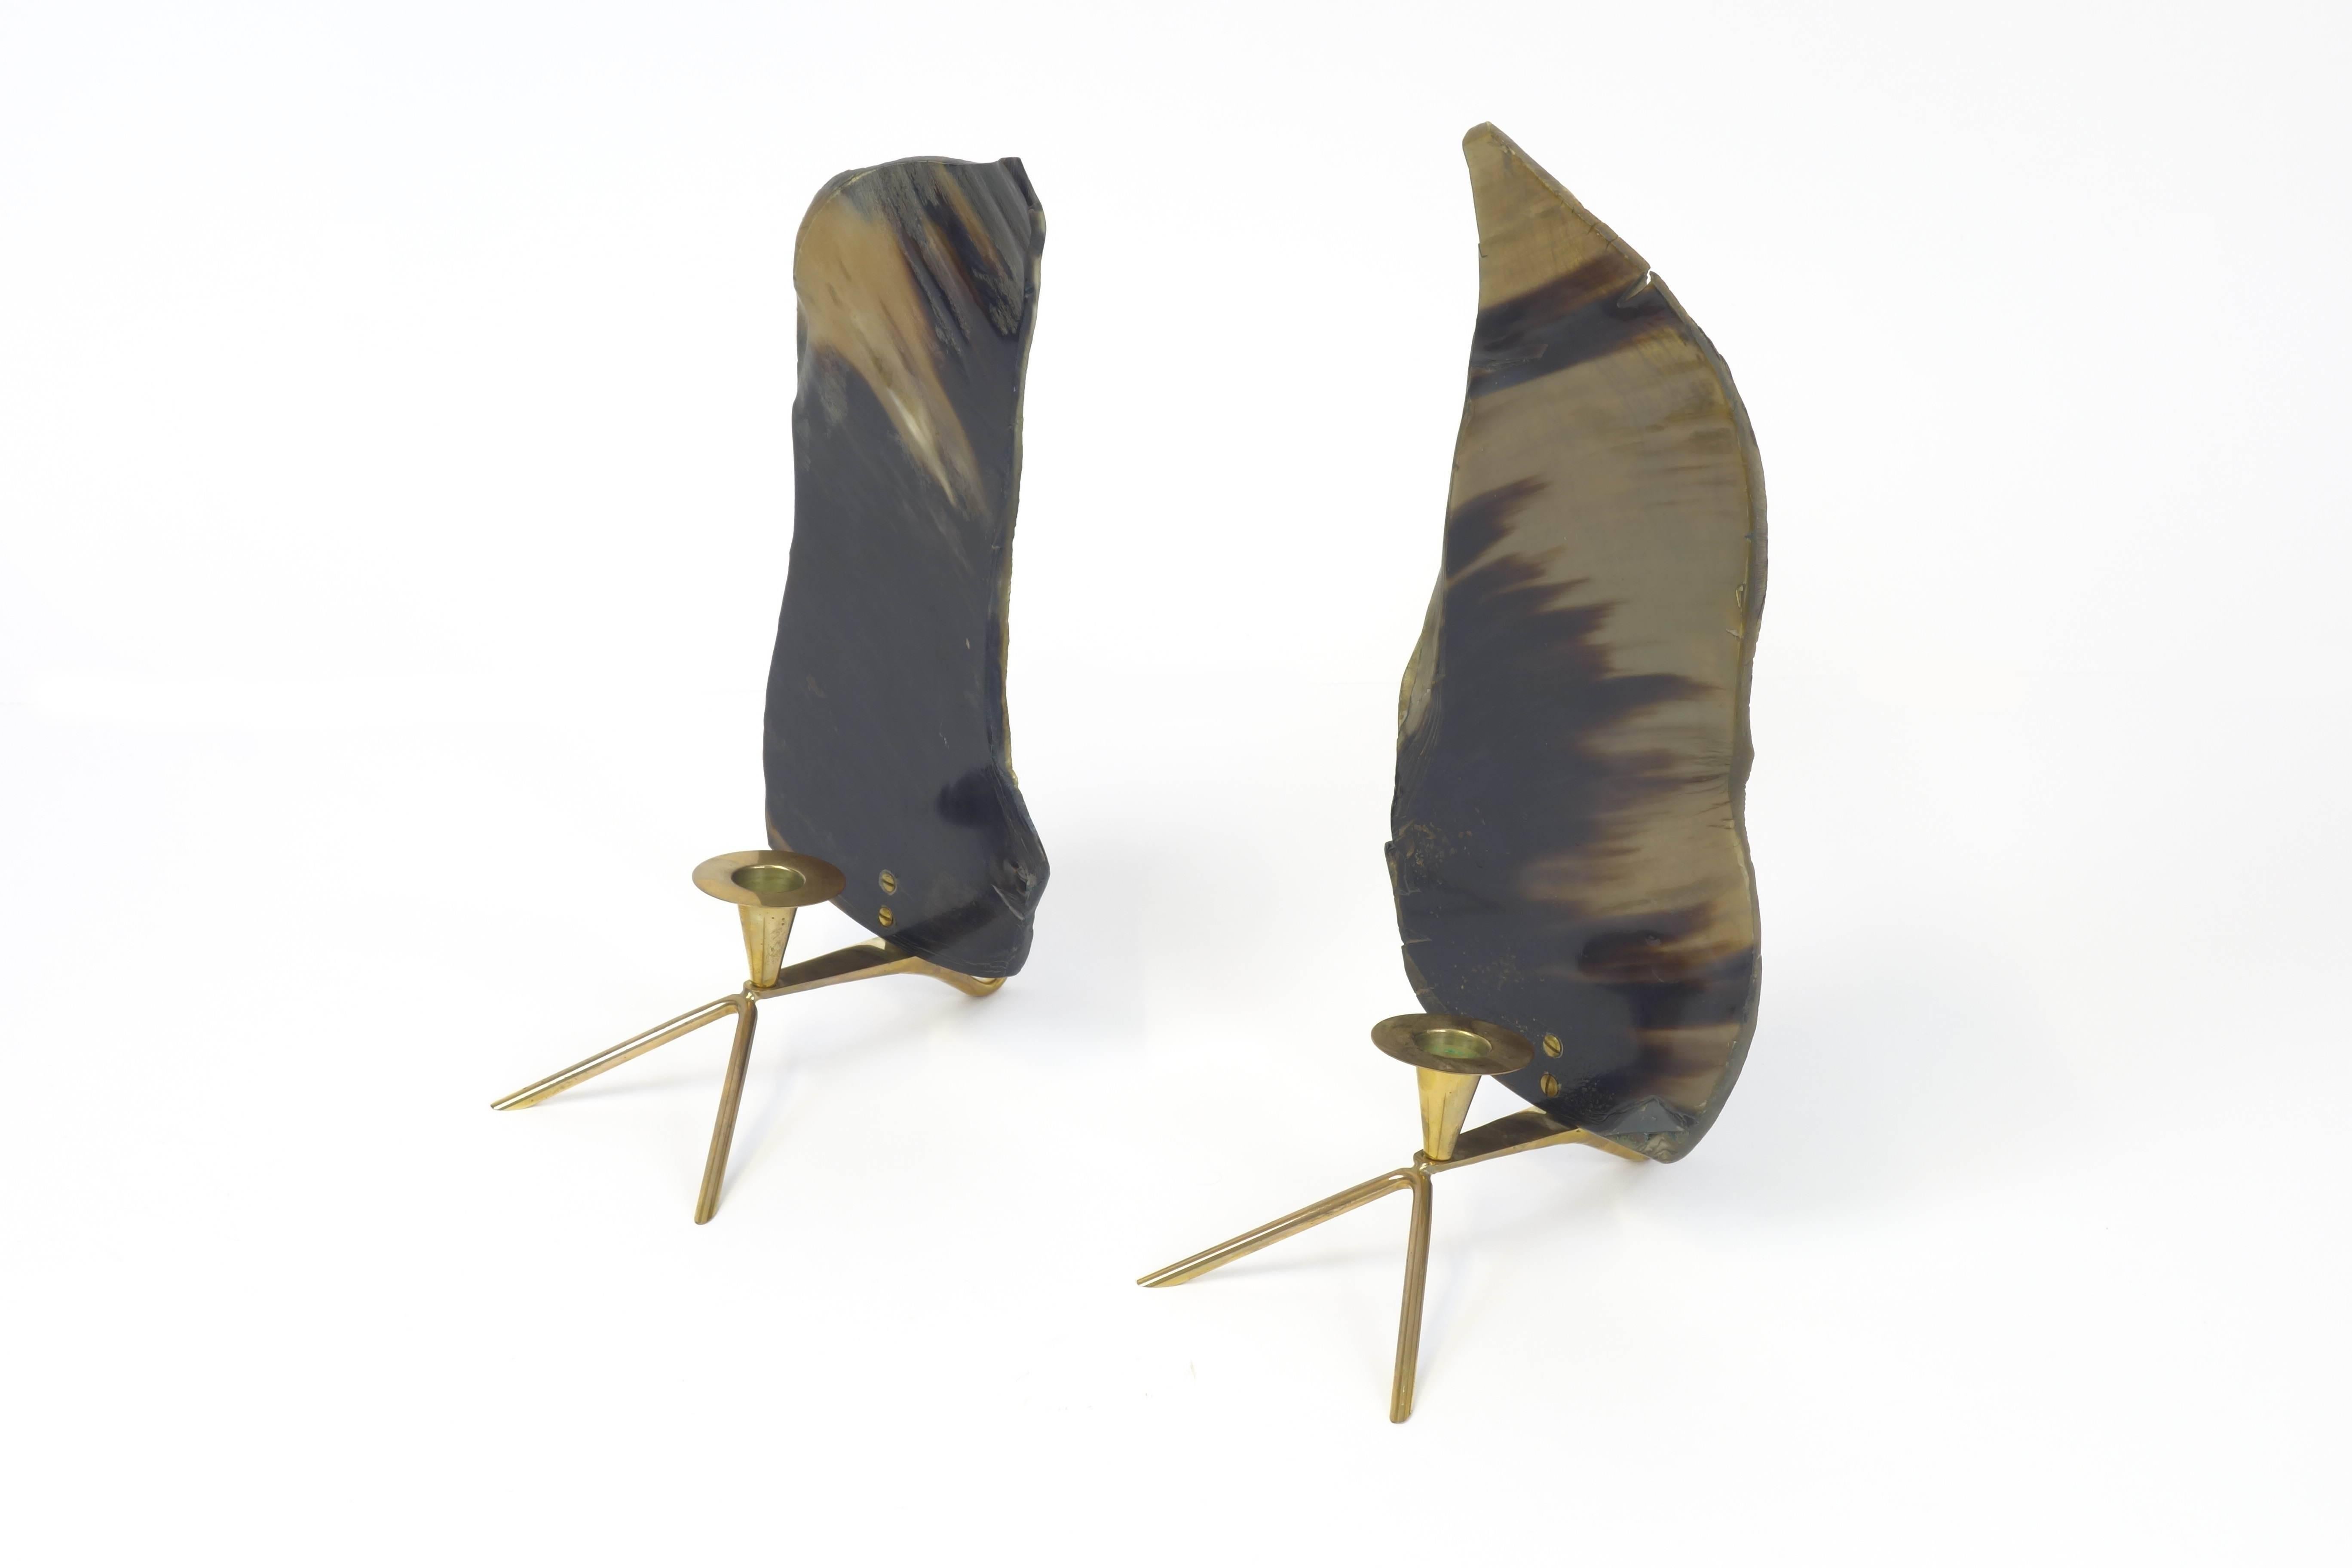 Austrian Pair of Brass Candleholders with Horn Panels by Carl Auböck